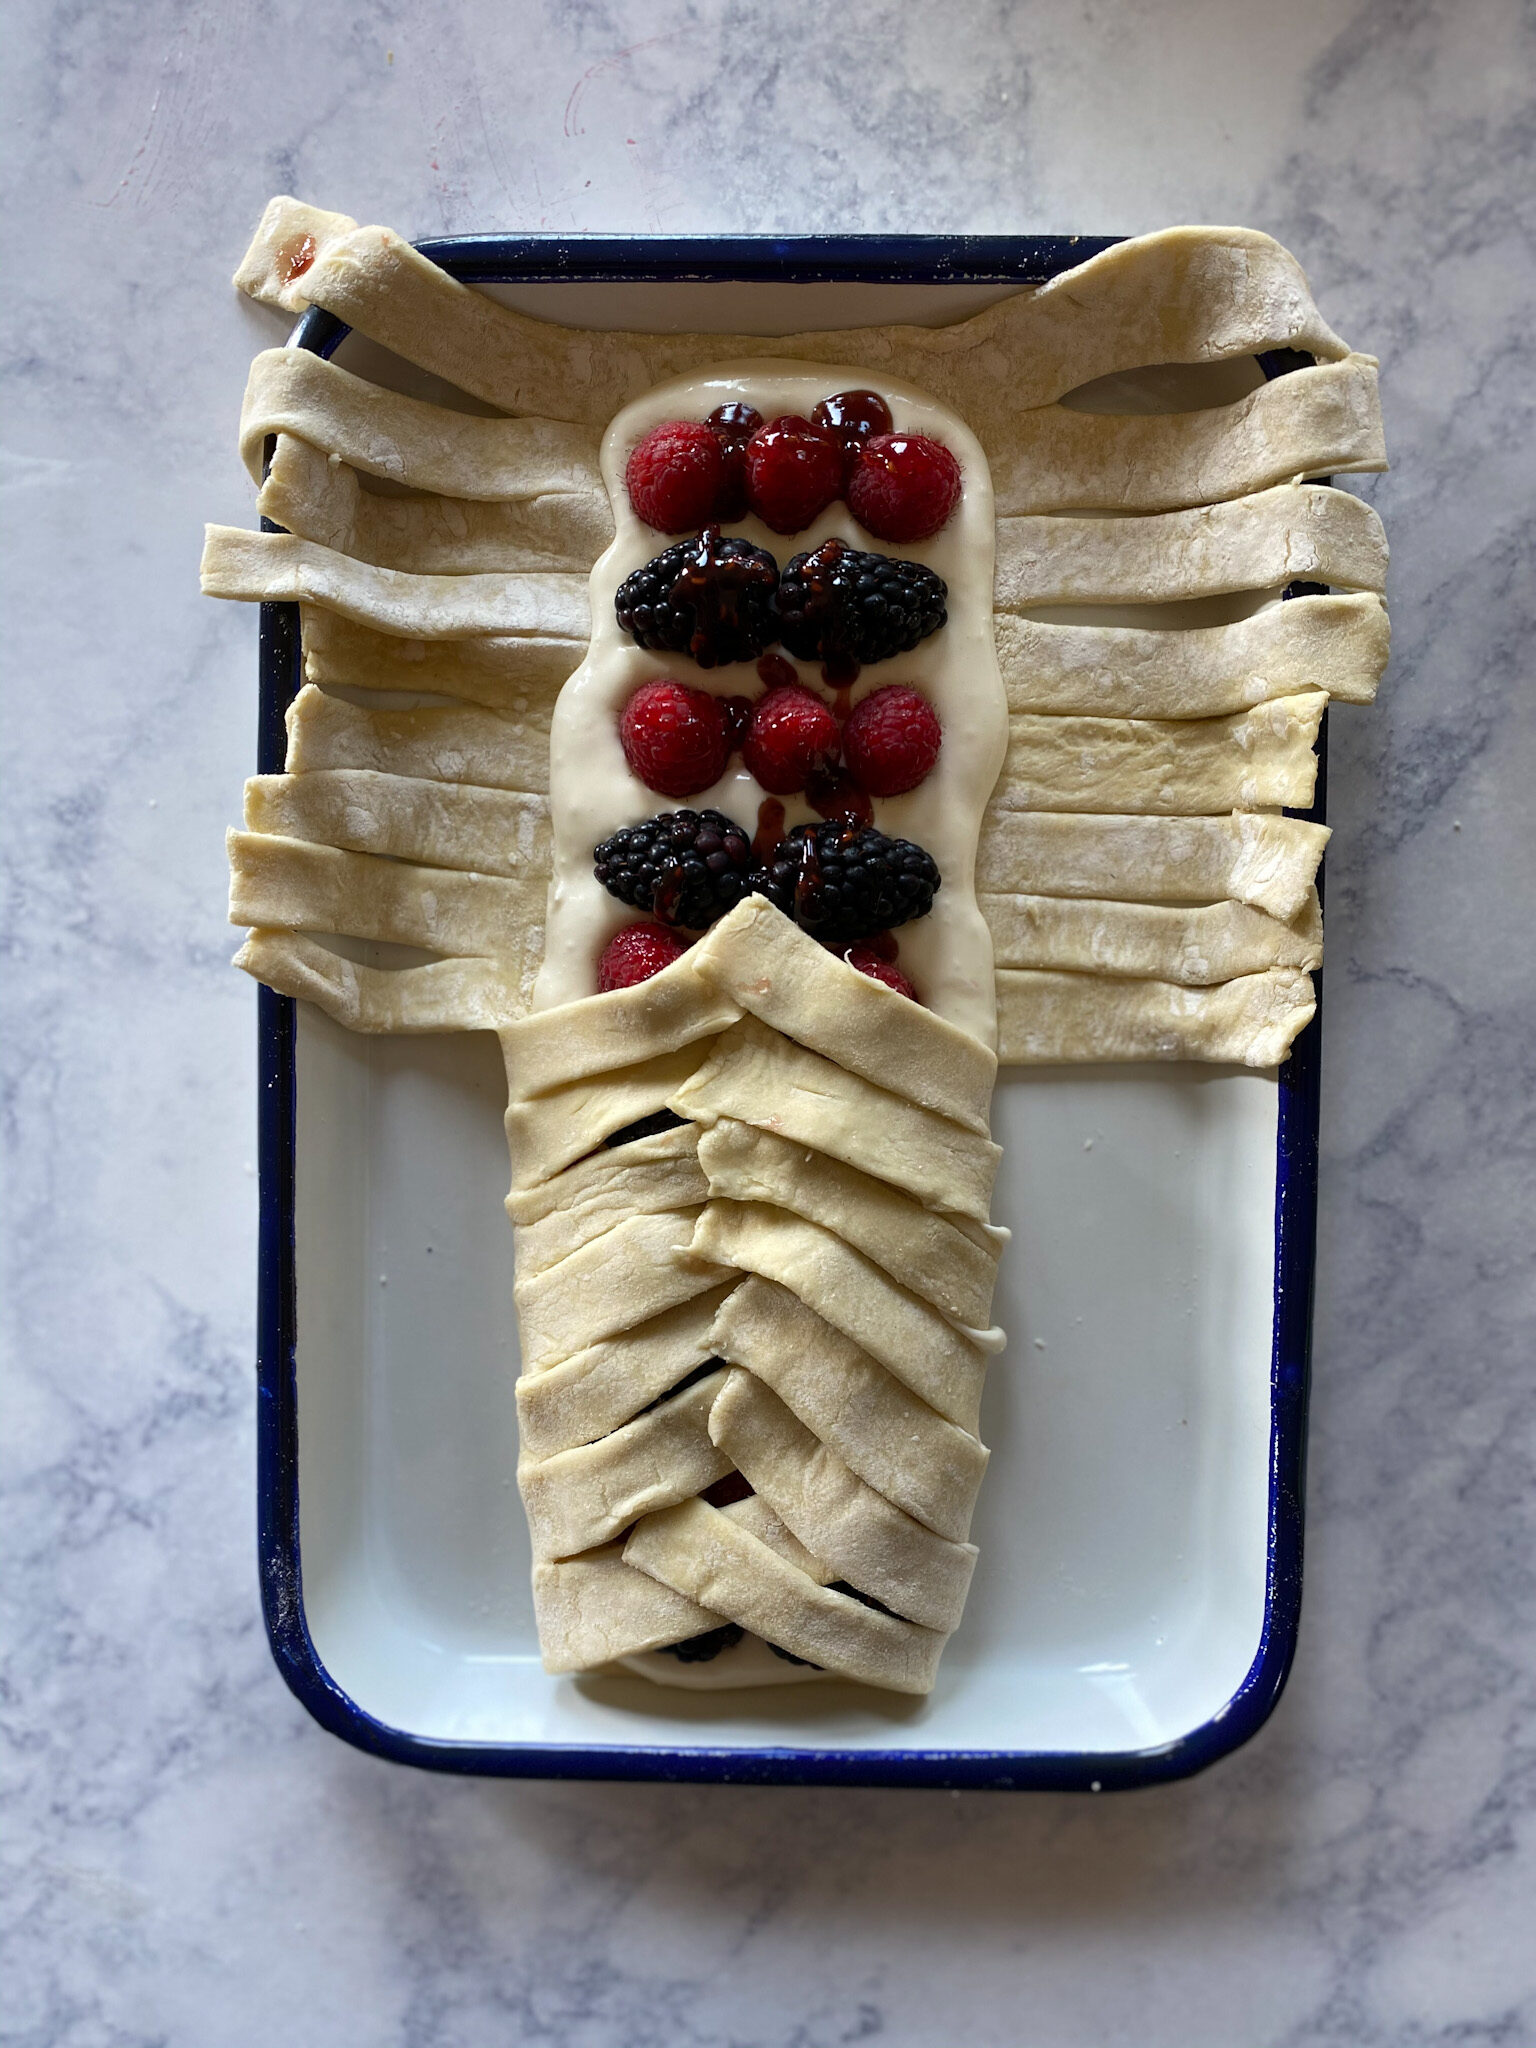 puff pastry being folded over berries